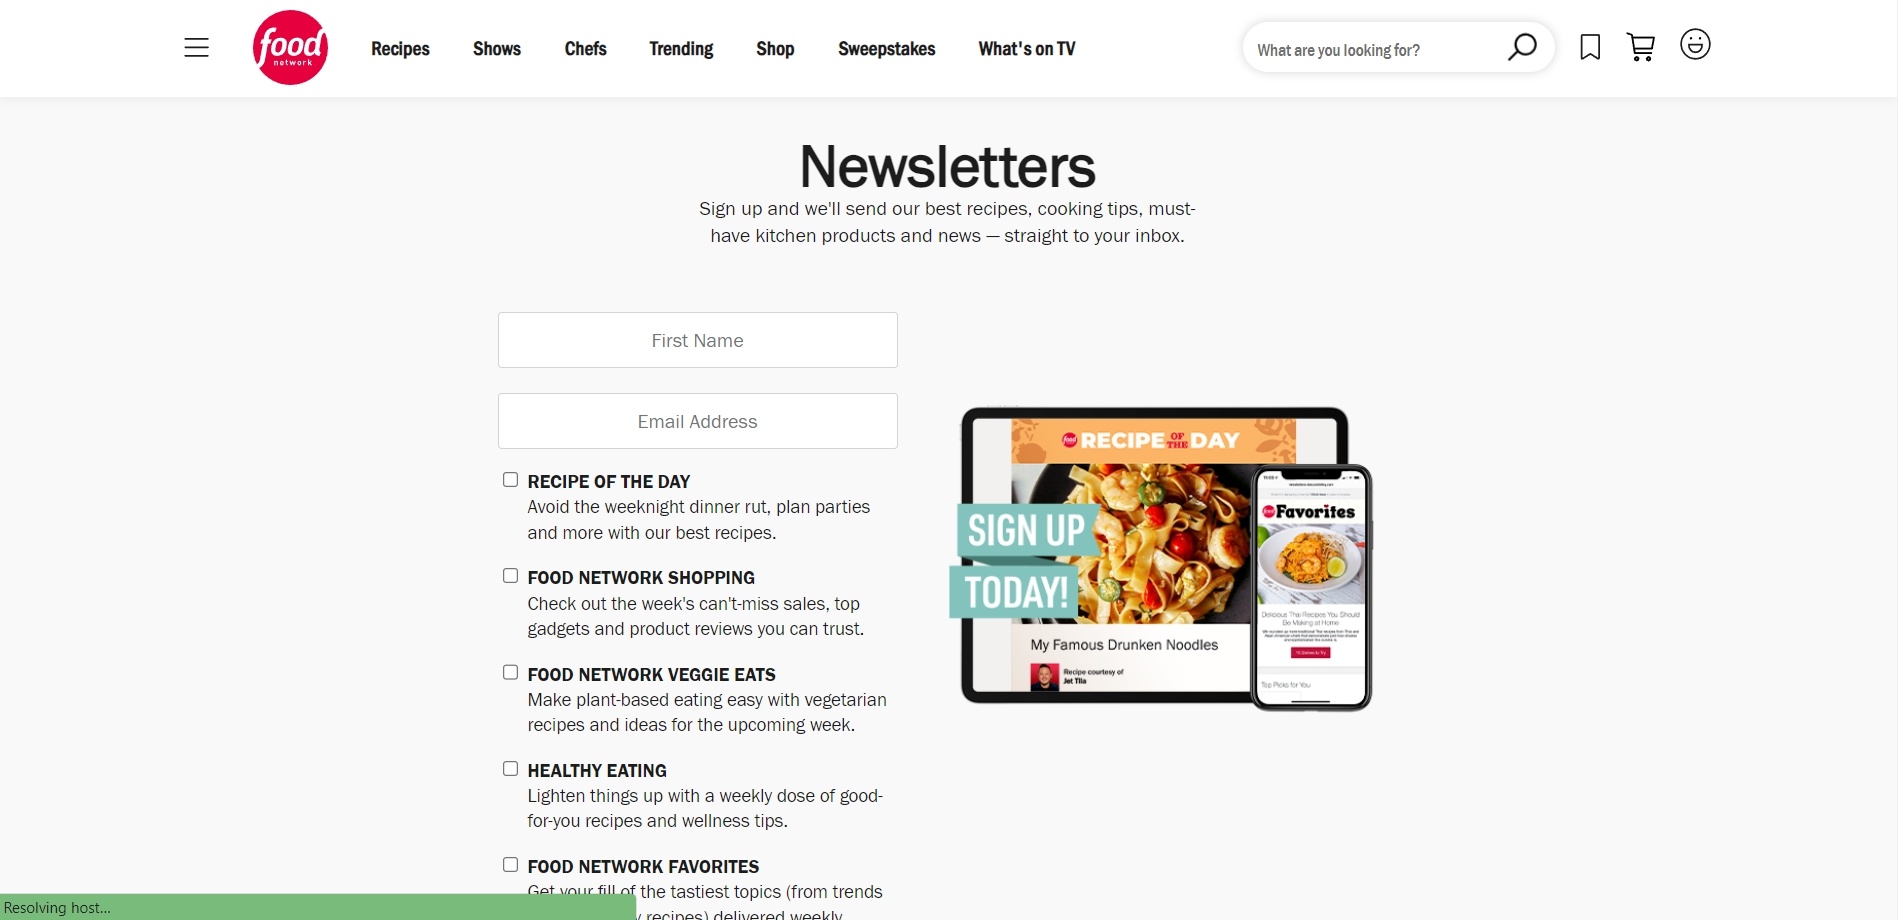 Food Network offers various newsletters to those who sign up